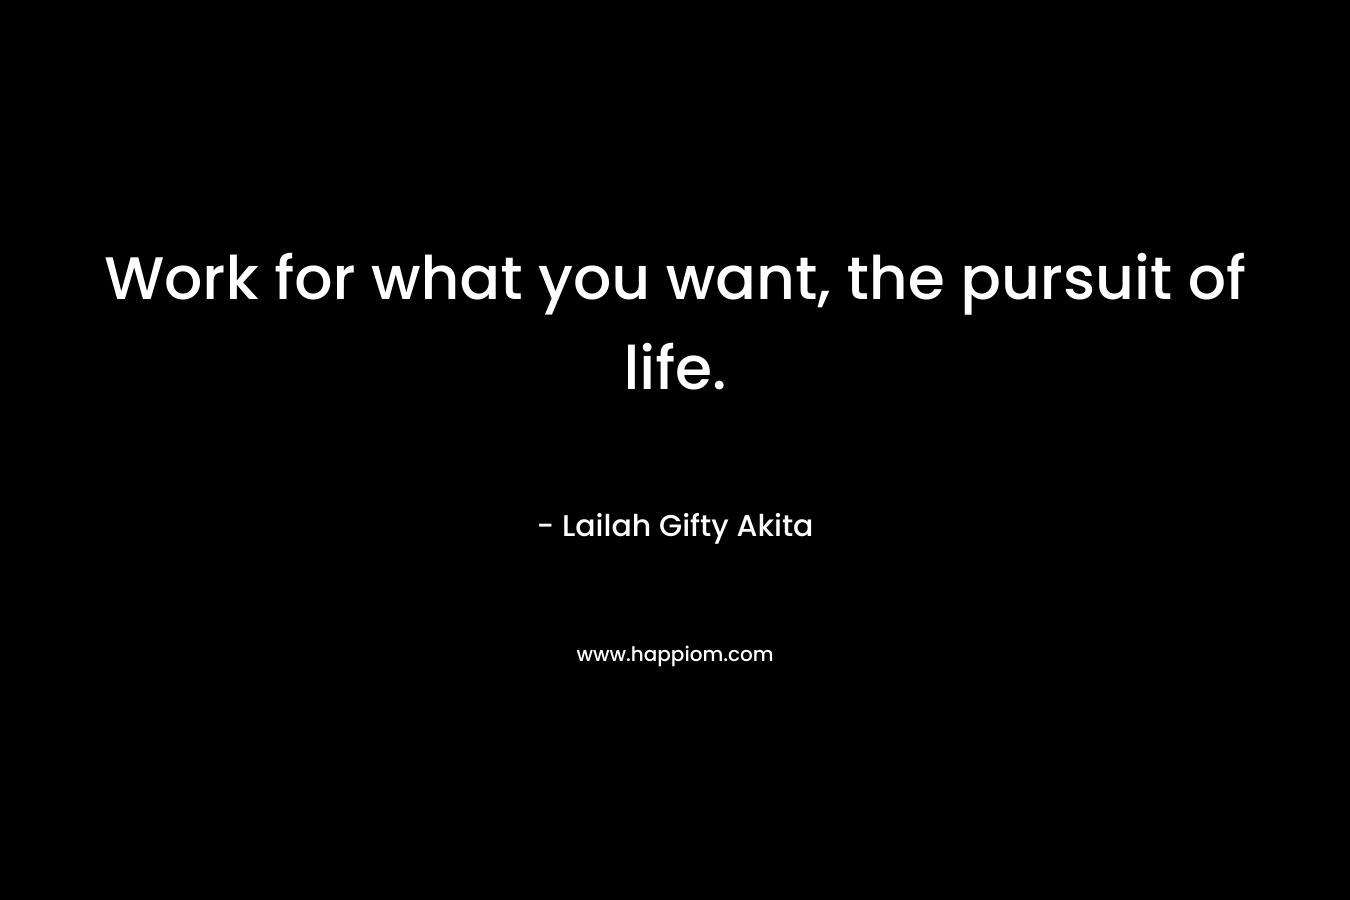 Work for what you want, the pursuit of life.